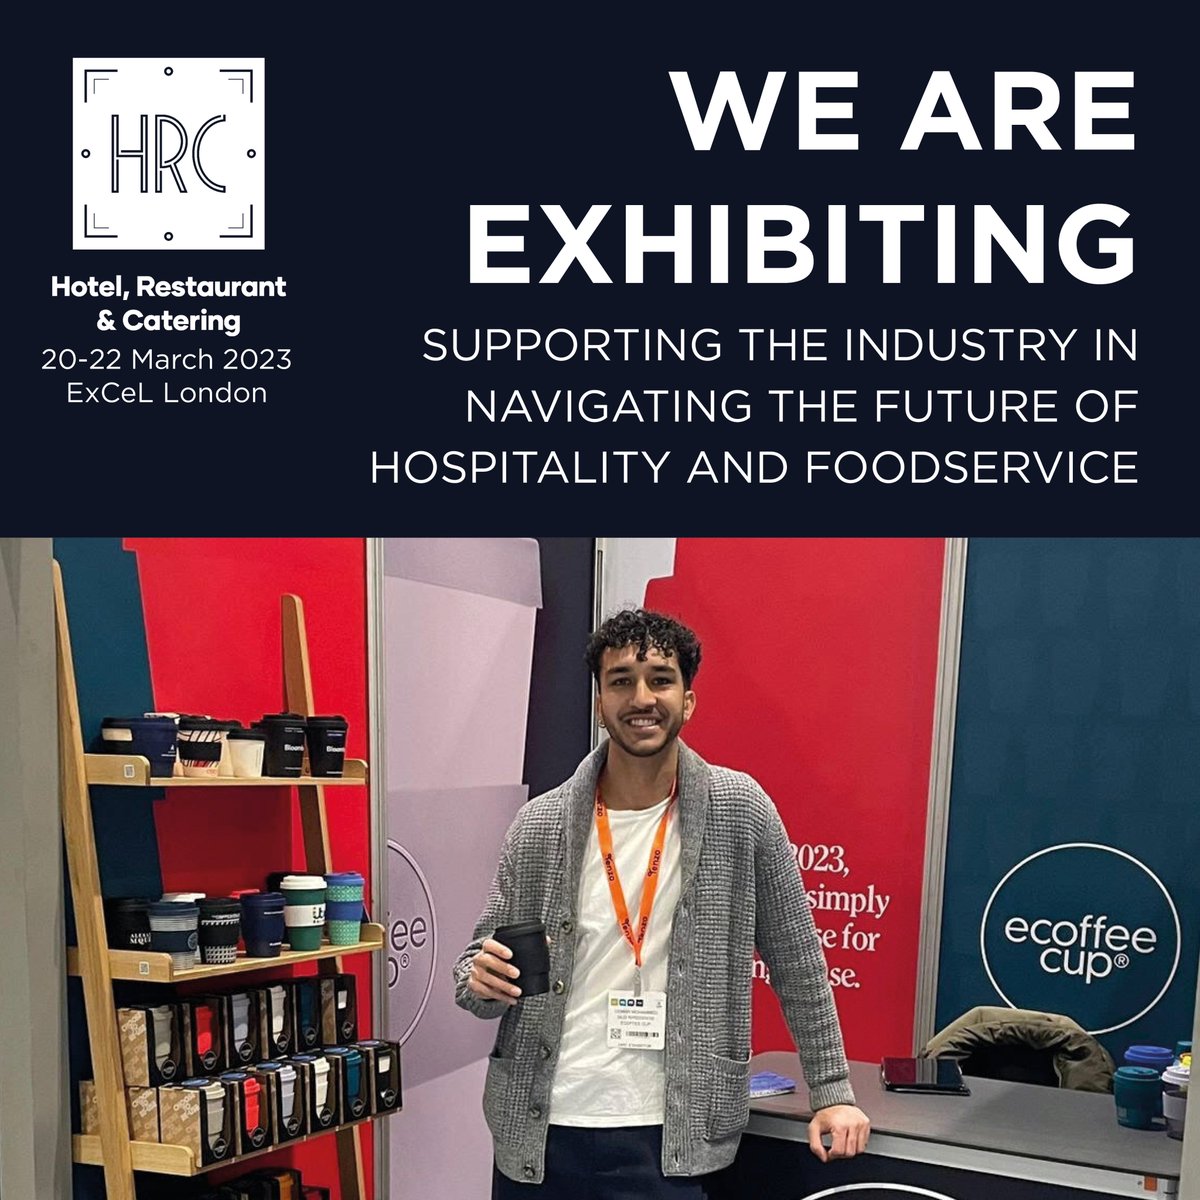 Catch us at the @HRC_Event on stand H1537 until March 22nd! Usman & Ryan will be there to introduce you to our range and answer any questions you might have. #EcoffeeCup #ChooseToReuse #NoExcuseForSingleUse #HRC23